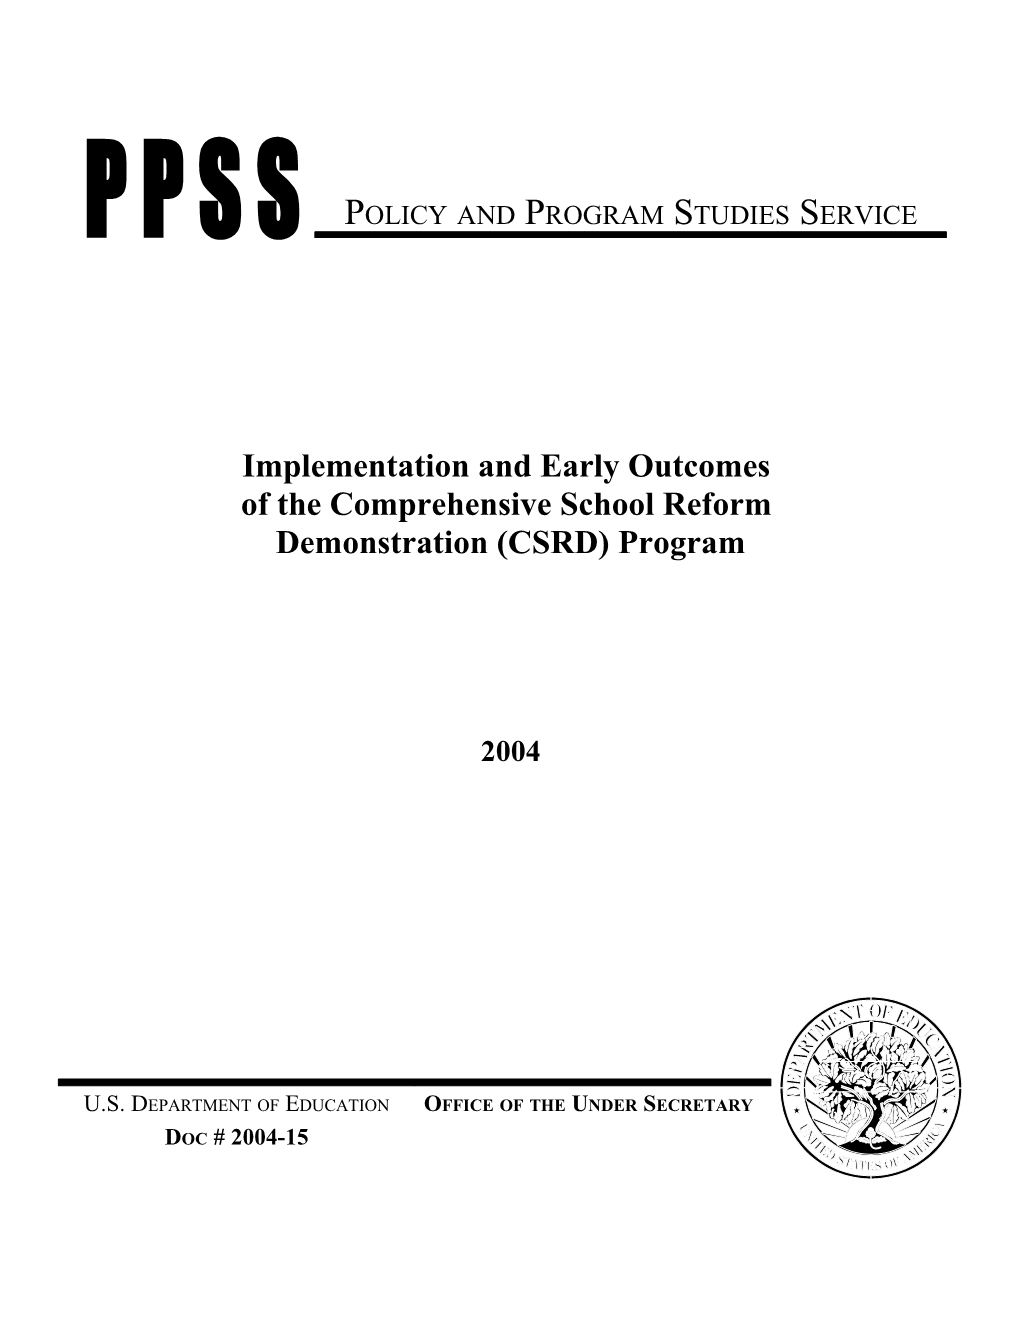 Implementation and Early Outcomes of the Comprehensive School Reform Demonstration Program